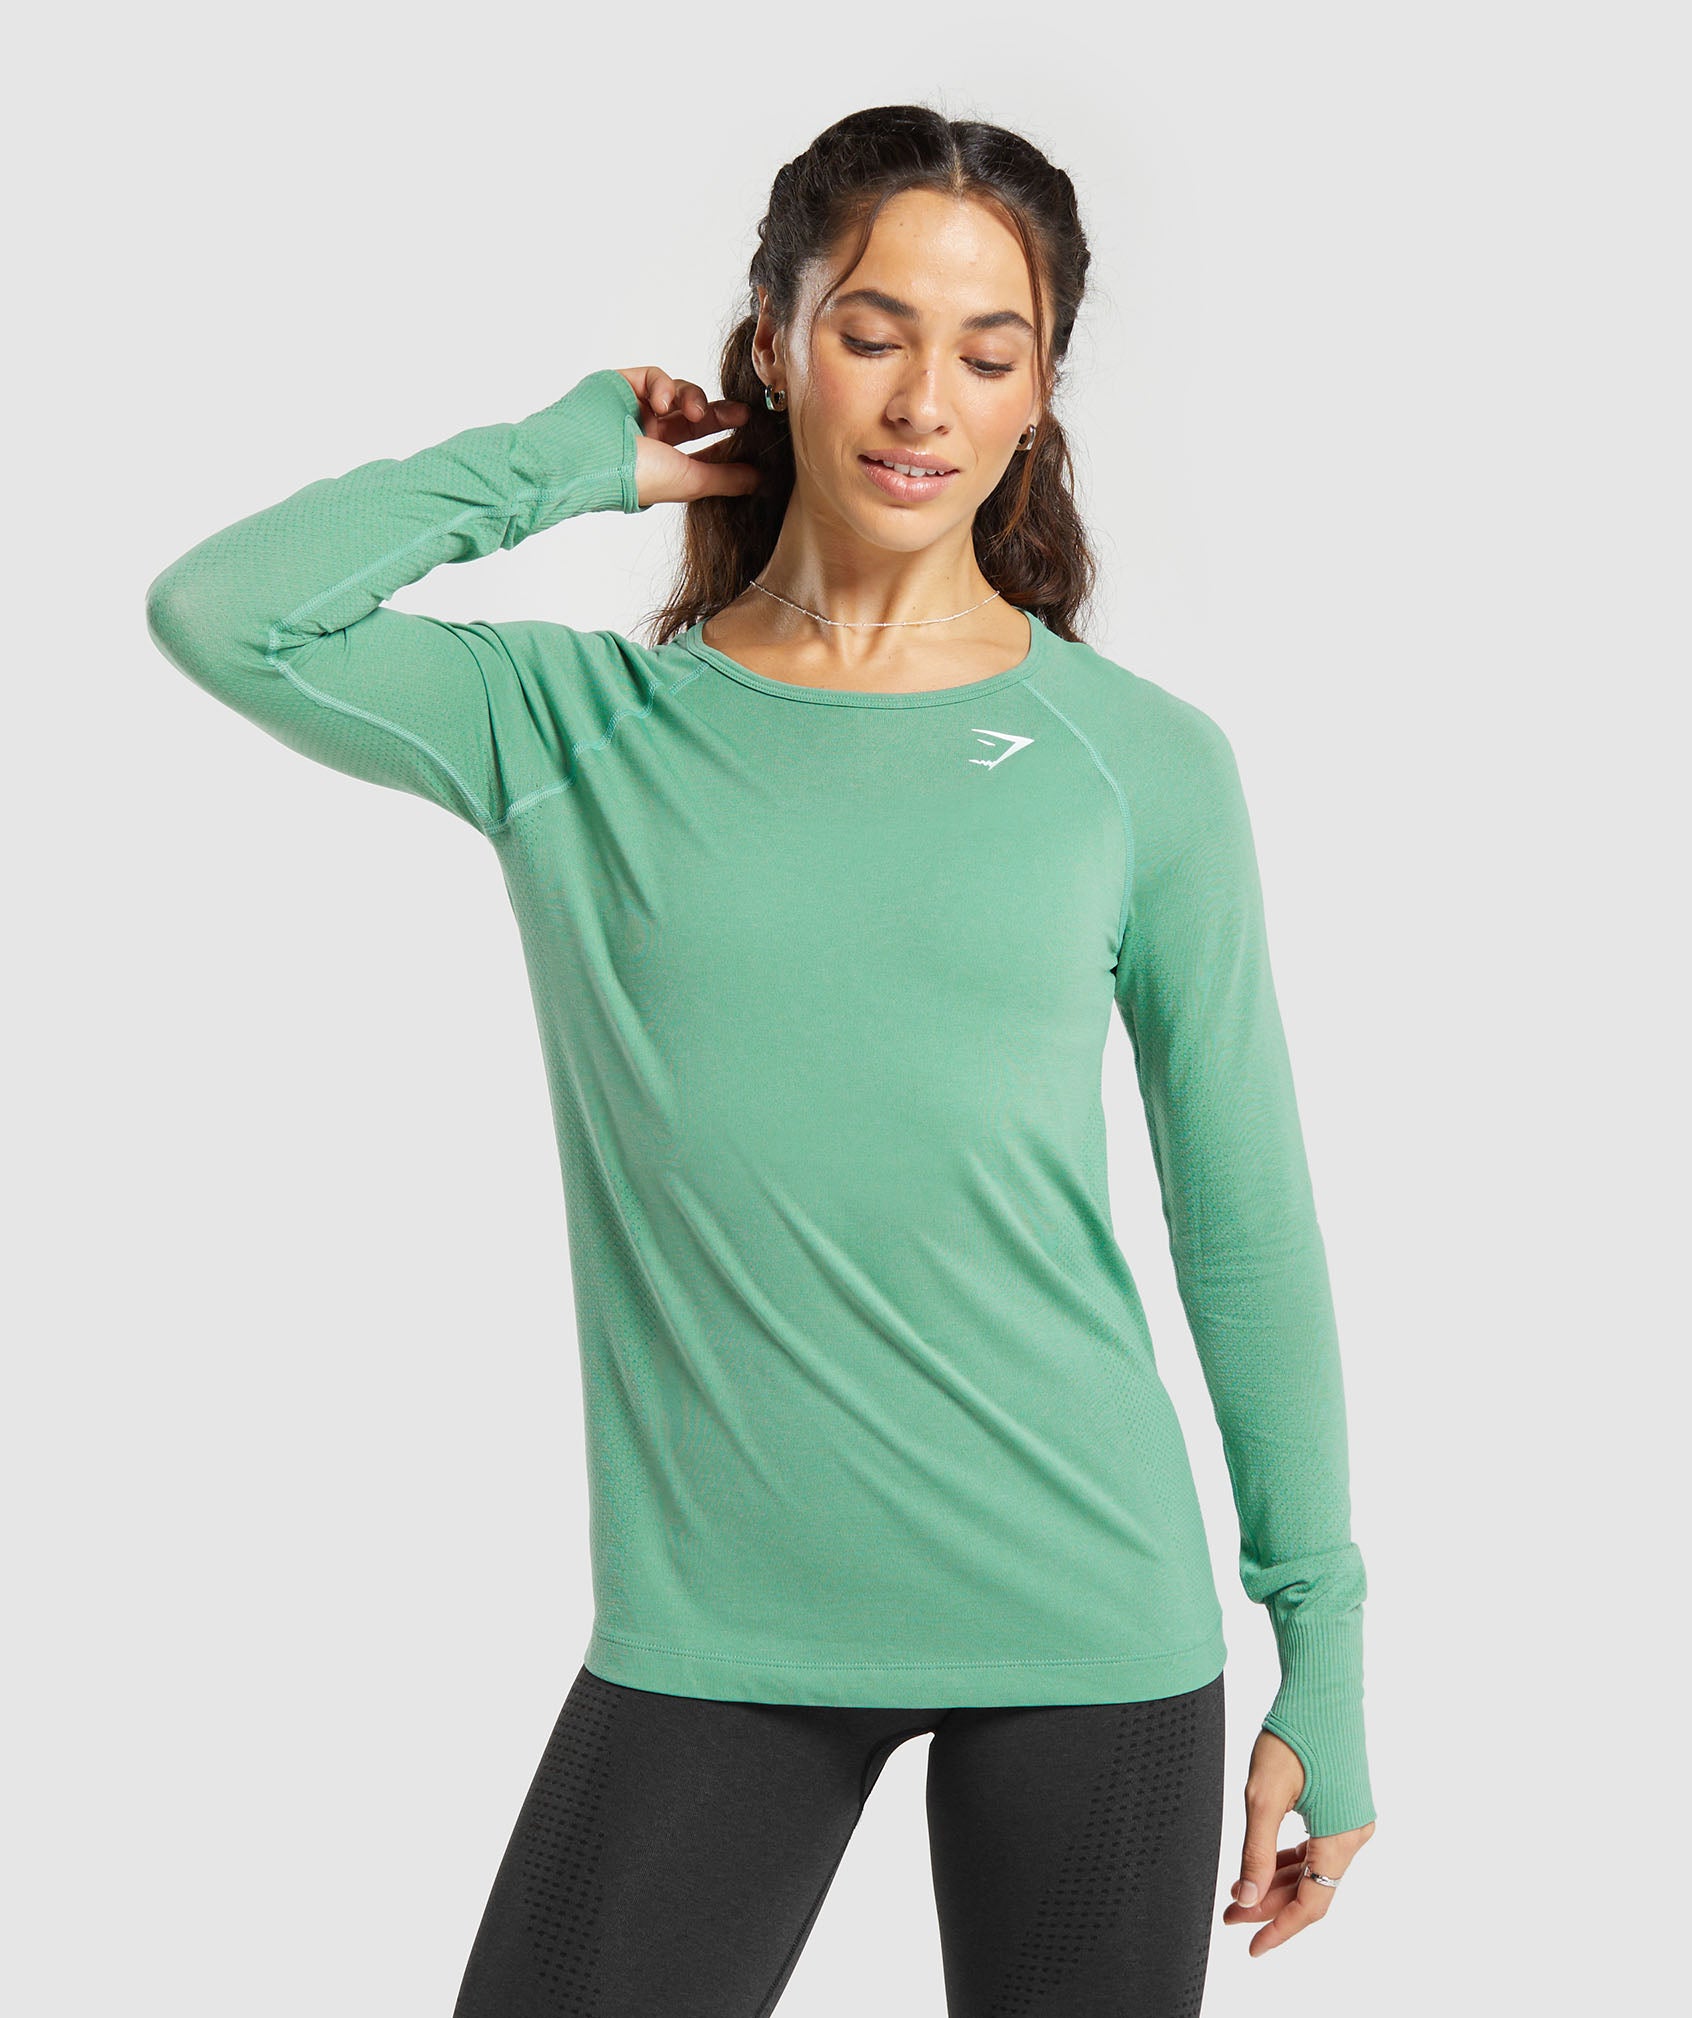 Alphalete activewear learn more dream more green logo long sleeve large -  $30 - From Nolan